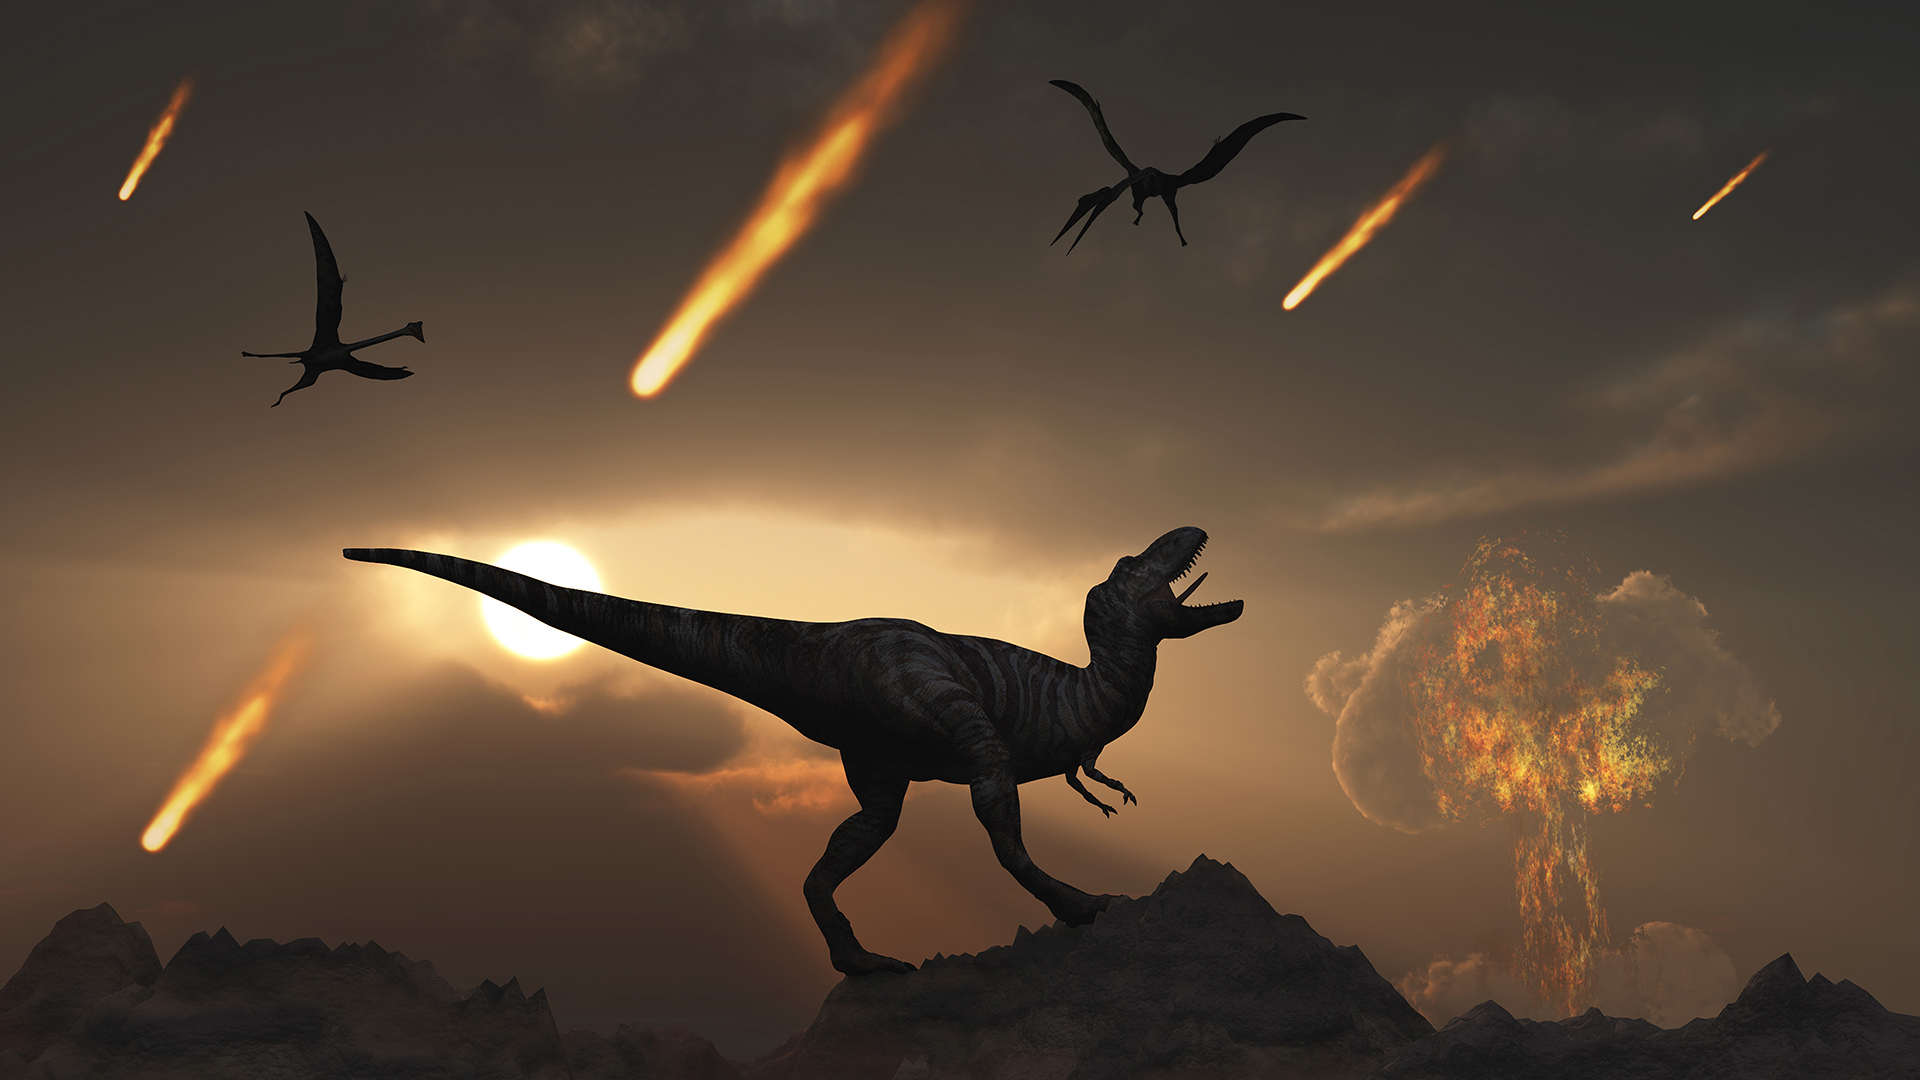 Following the asteroid impact that wiped out the dinosaurs, parts of the planet would have been plunged into darkness.